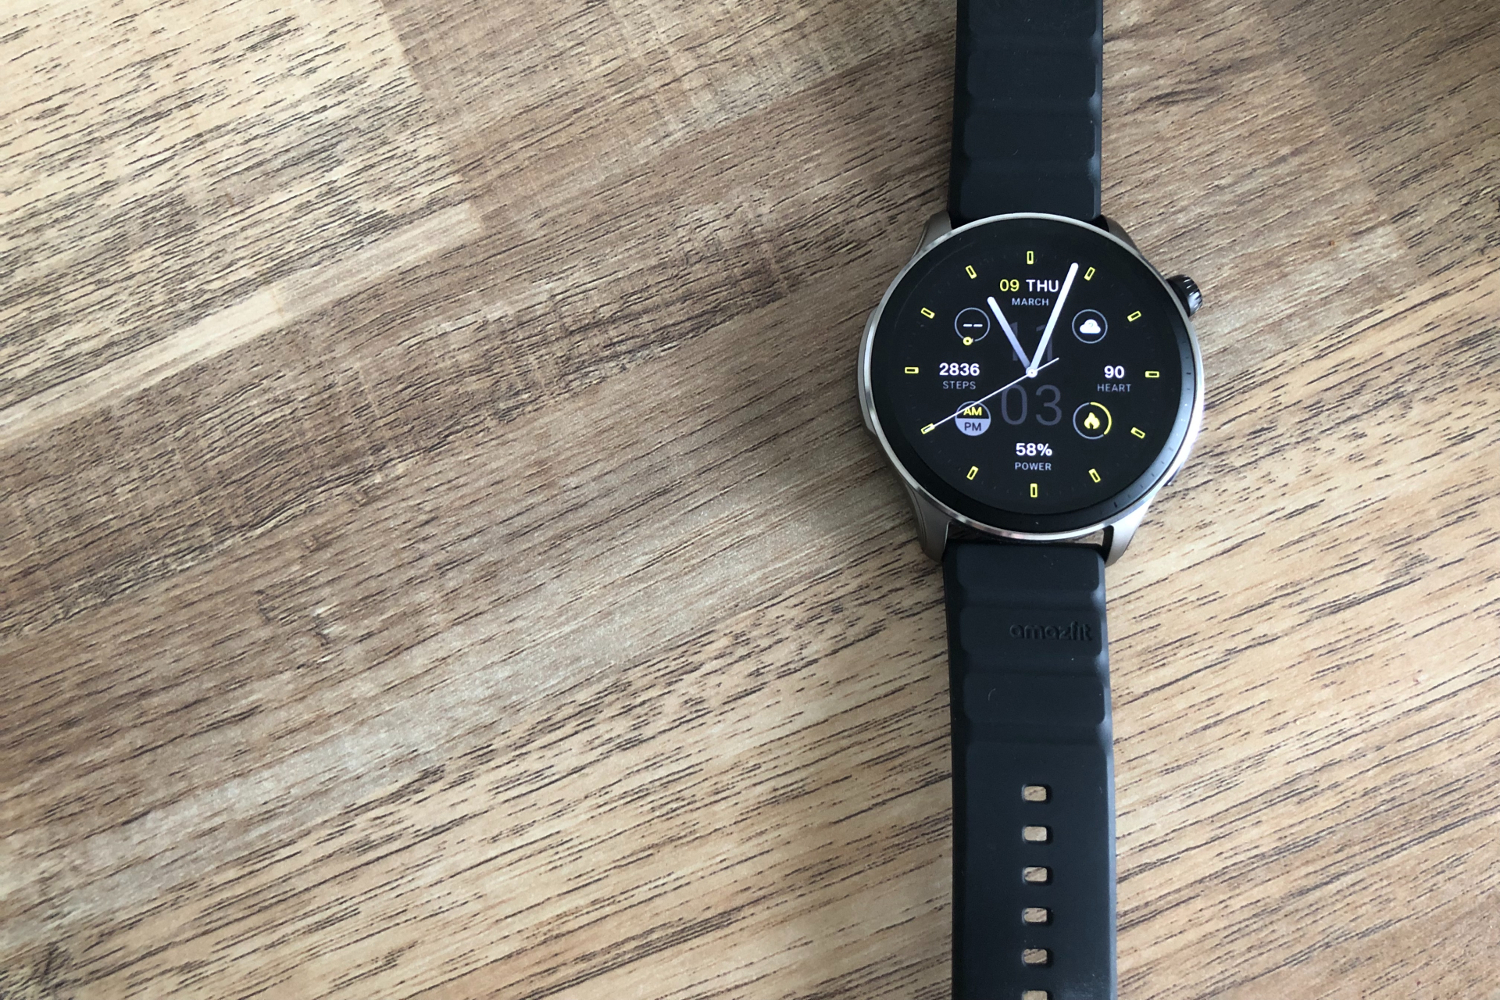 We tried the Amazfit GTR 4 watch to see if it's worth the hype